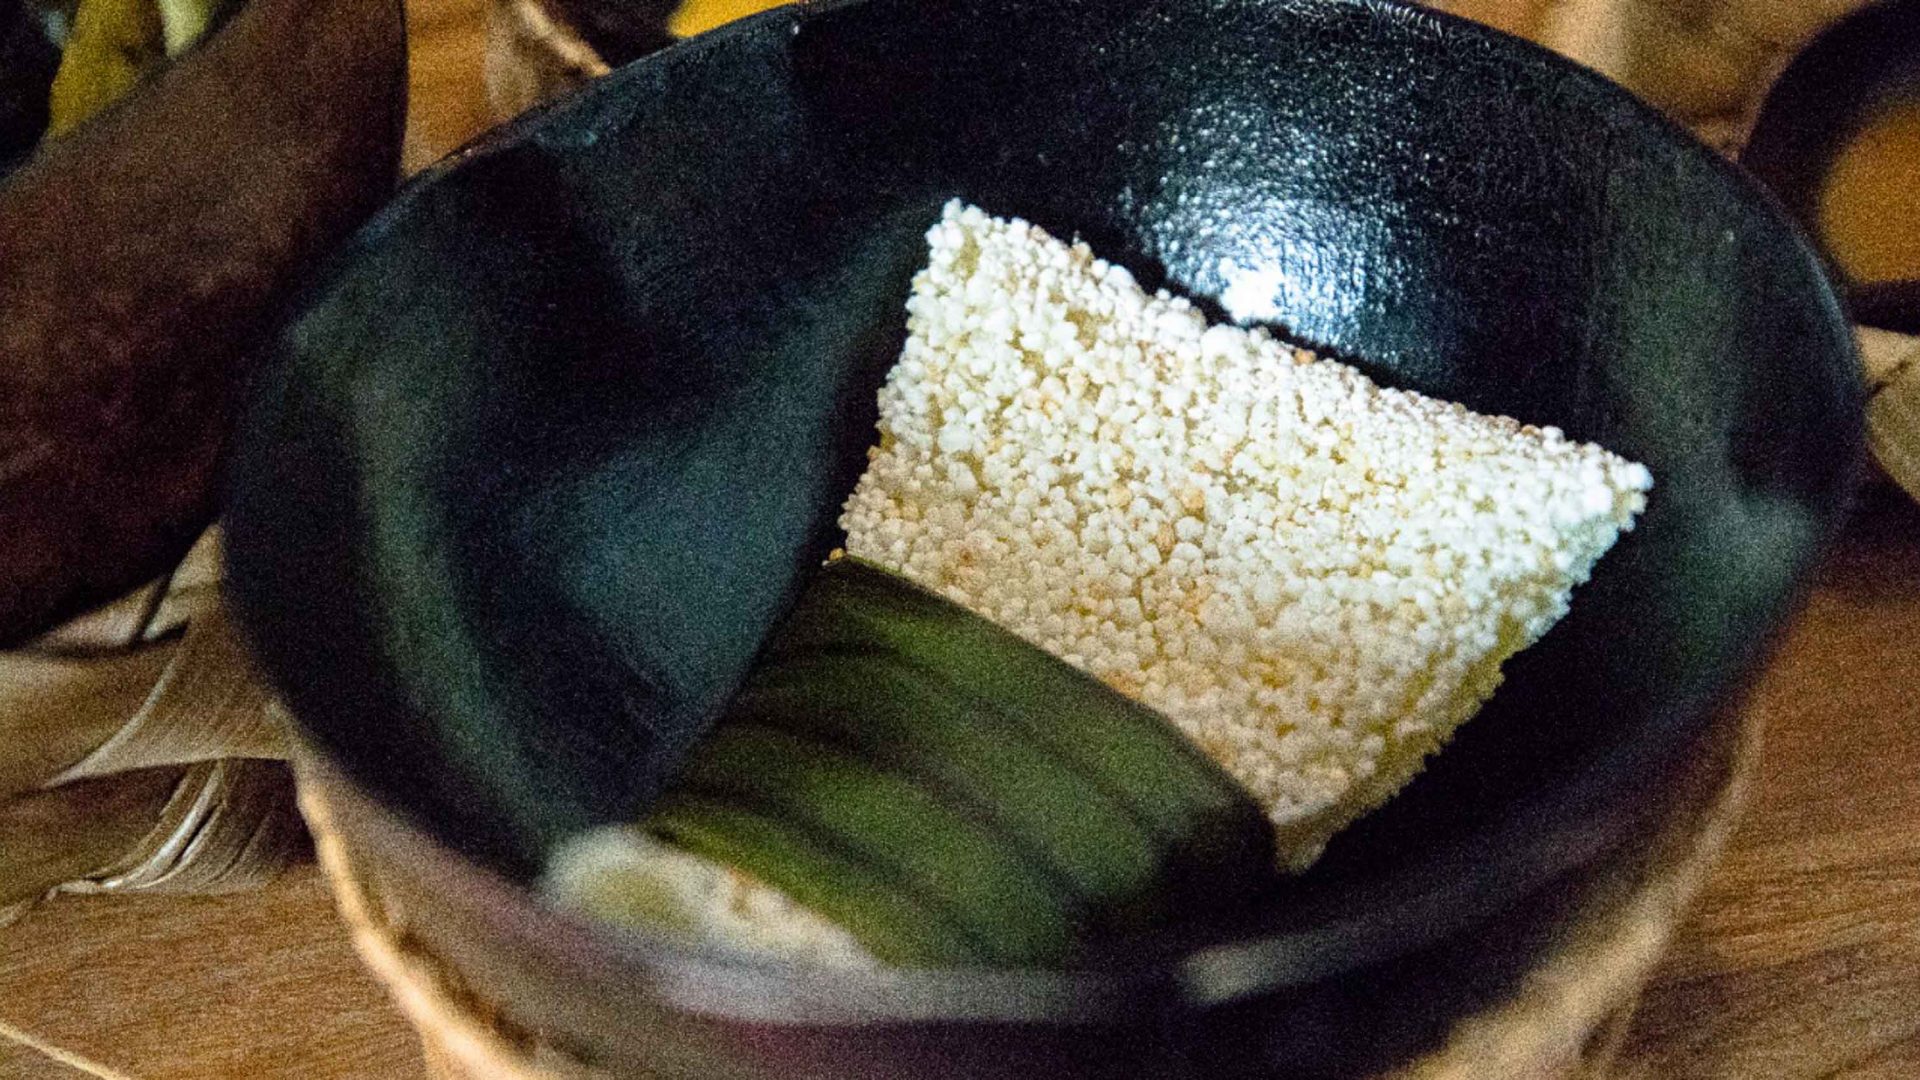 Tapioca being cooked.